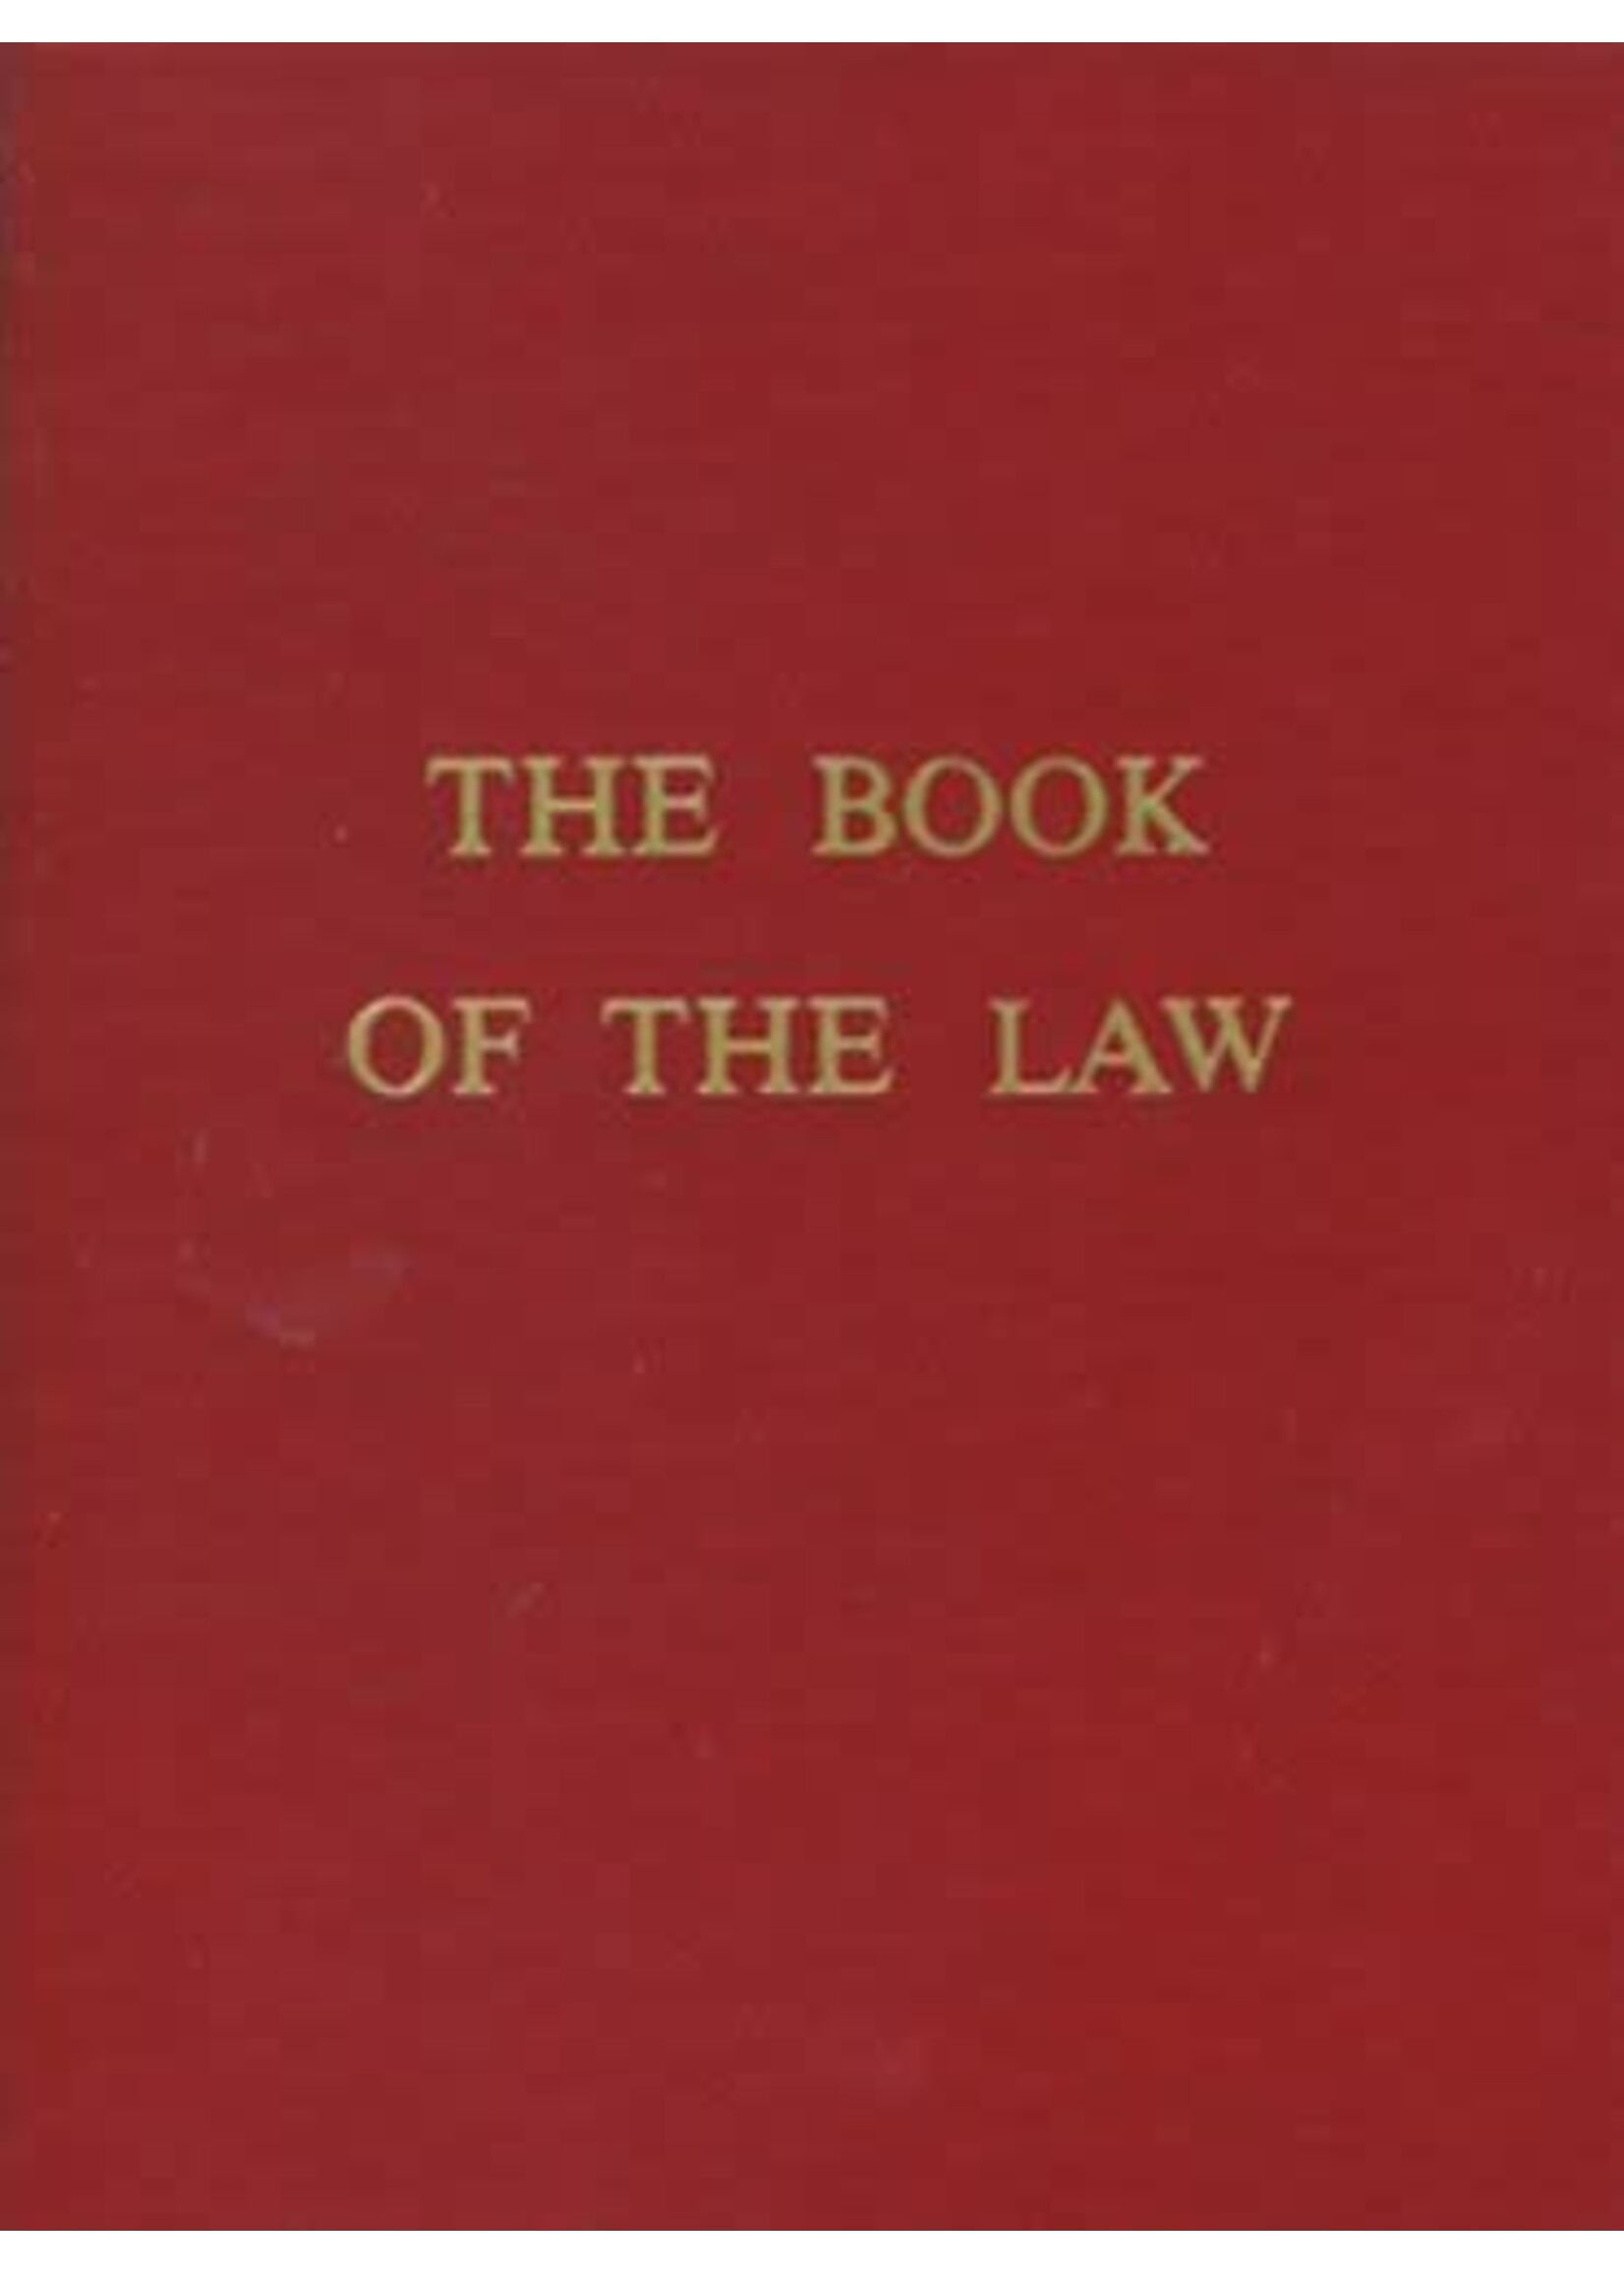 Book of the Law by Aleister and Rose Edith Crowley, Ordo Templi Orientis